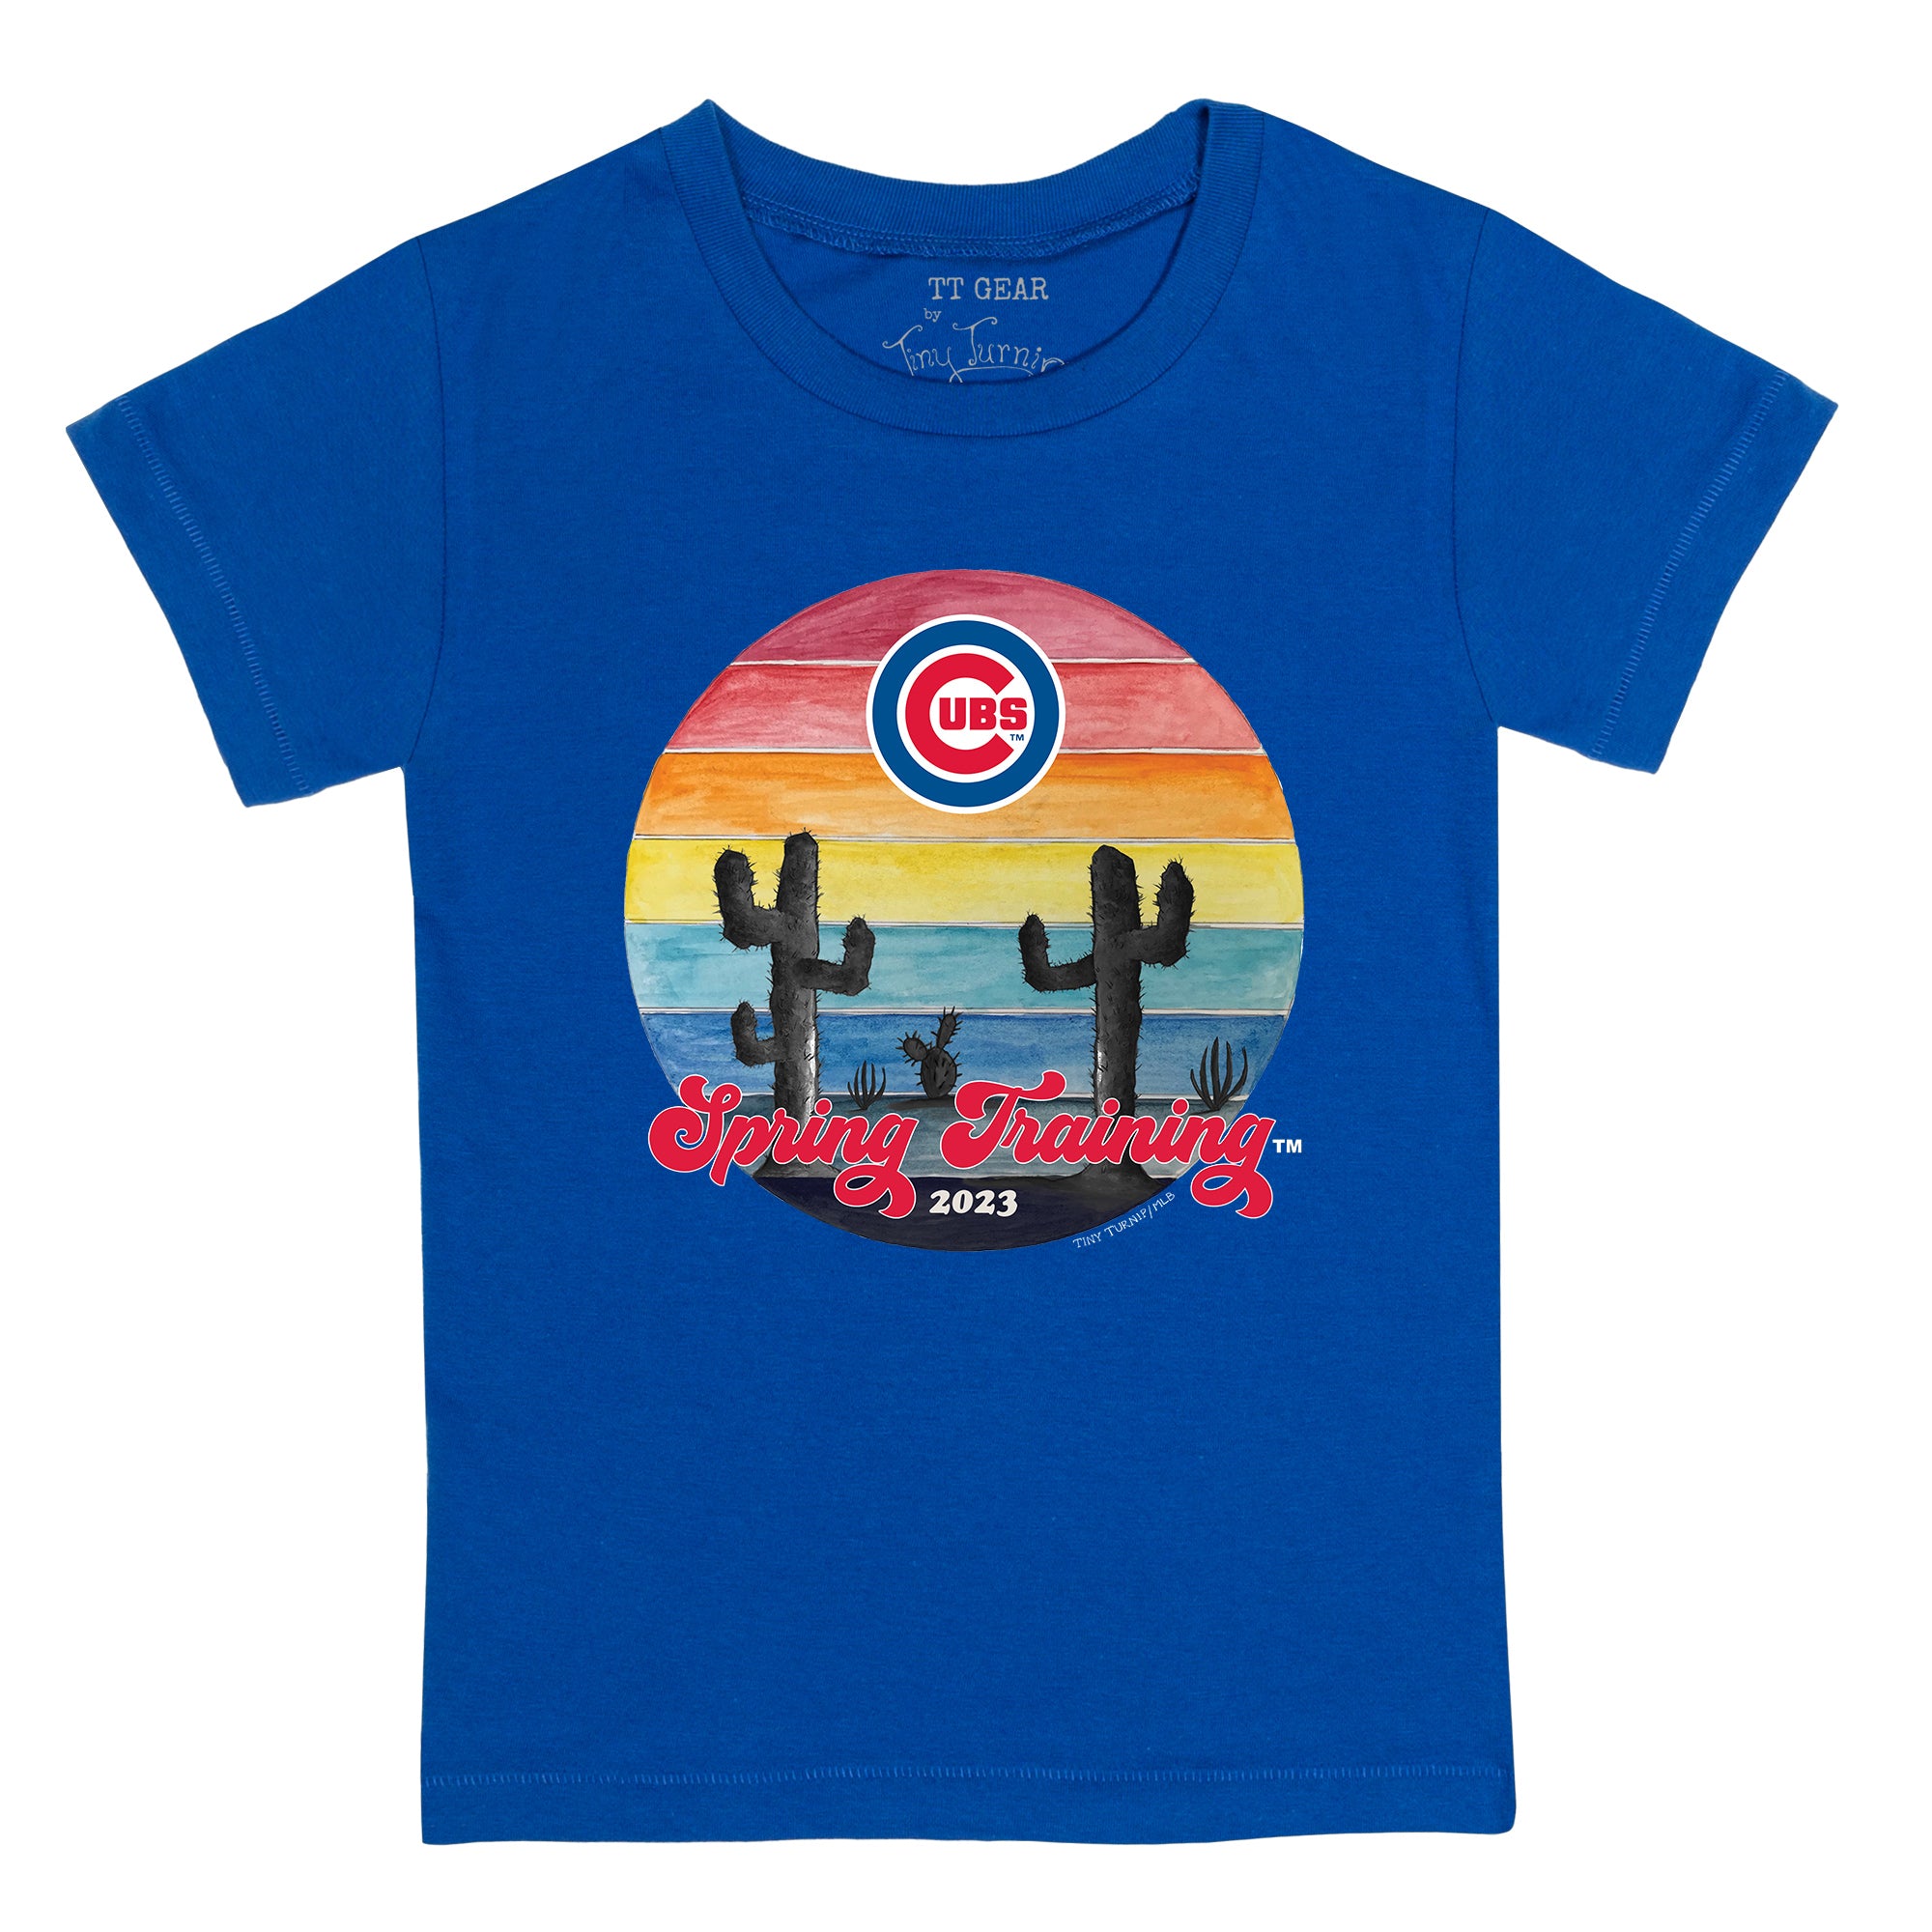 Cheap Chicago Cubs Apparel, Discount Cubs Gear, MLB Cubs Merchandise On Sale